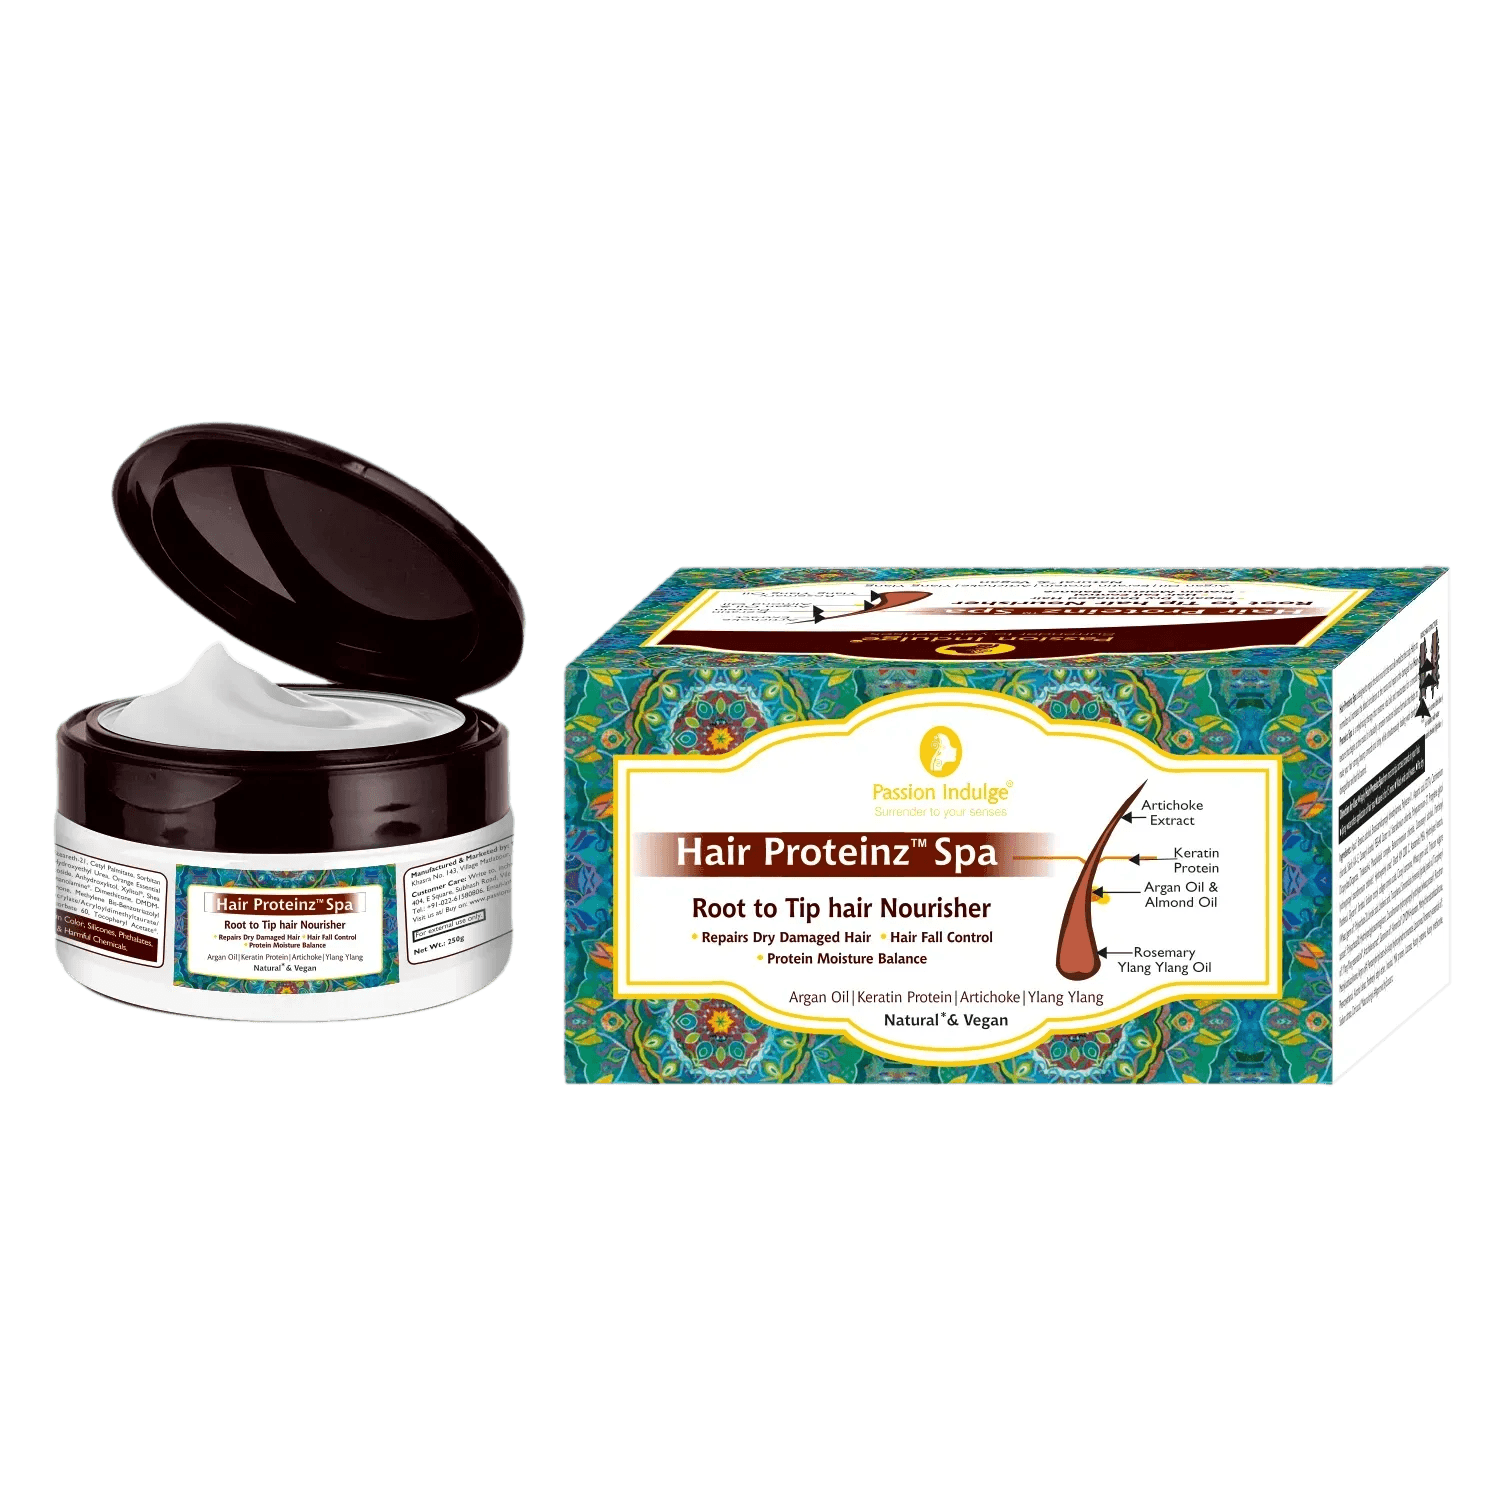 Passion Indulge | Passion Indulge Hair Proteinz Hair Spa (250 gm)